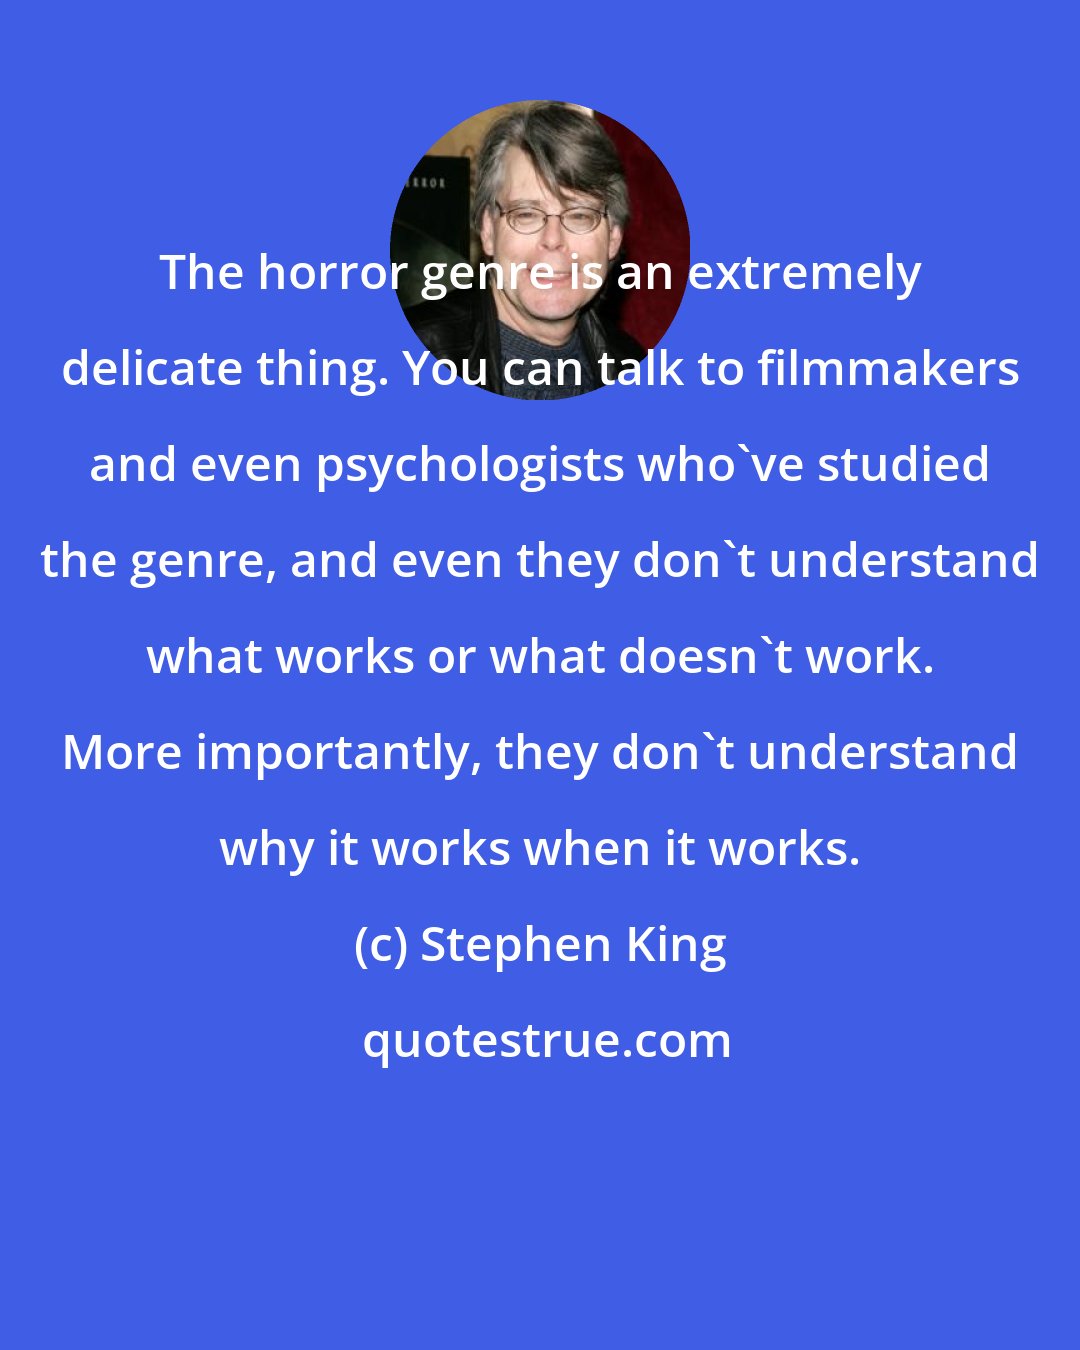 Stephen King: The horror genre is an extremely delicate thing. You can talk to filmmakers and even psychologists who've studied the genre, and even they don't understand what works or what doesn't work. More importantly, they don't understand why it works when it works.